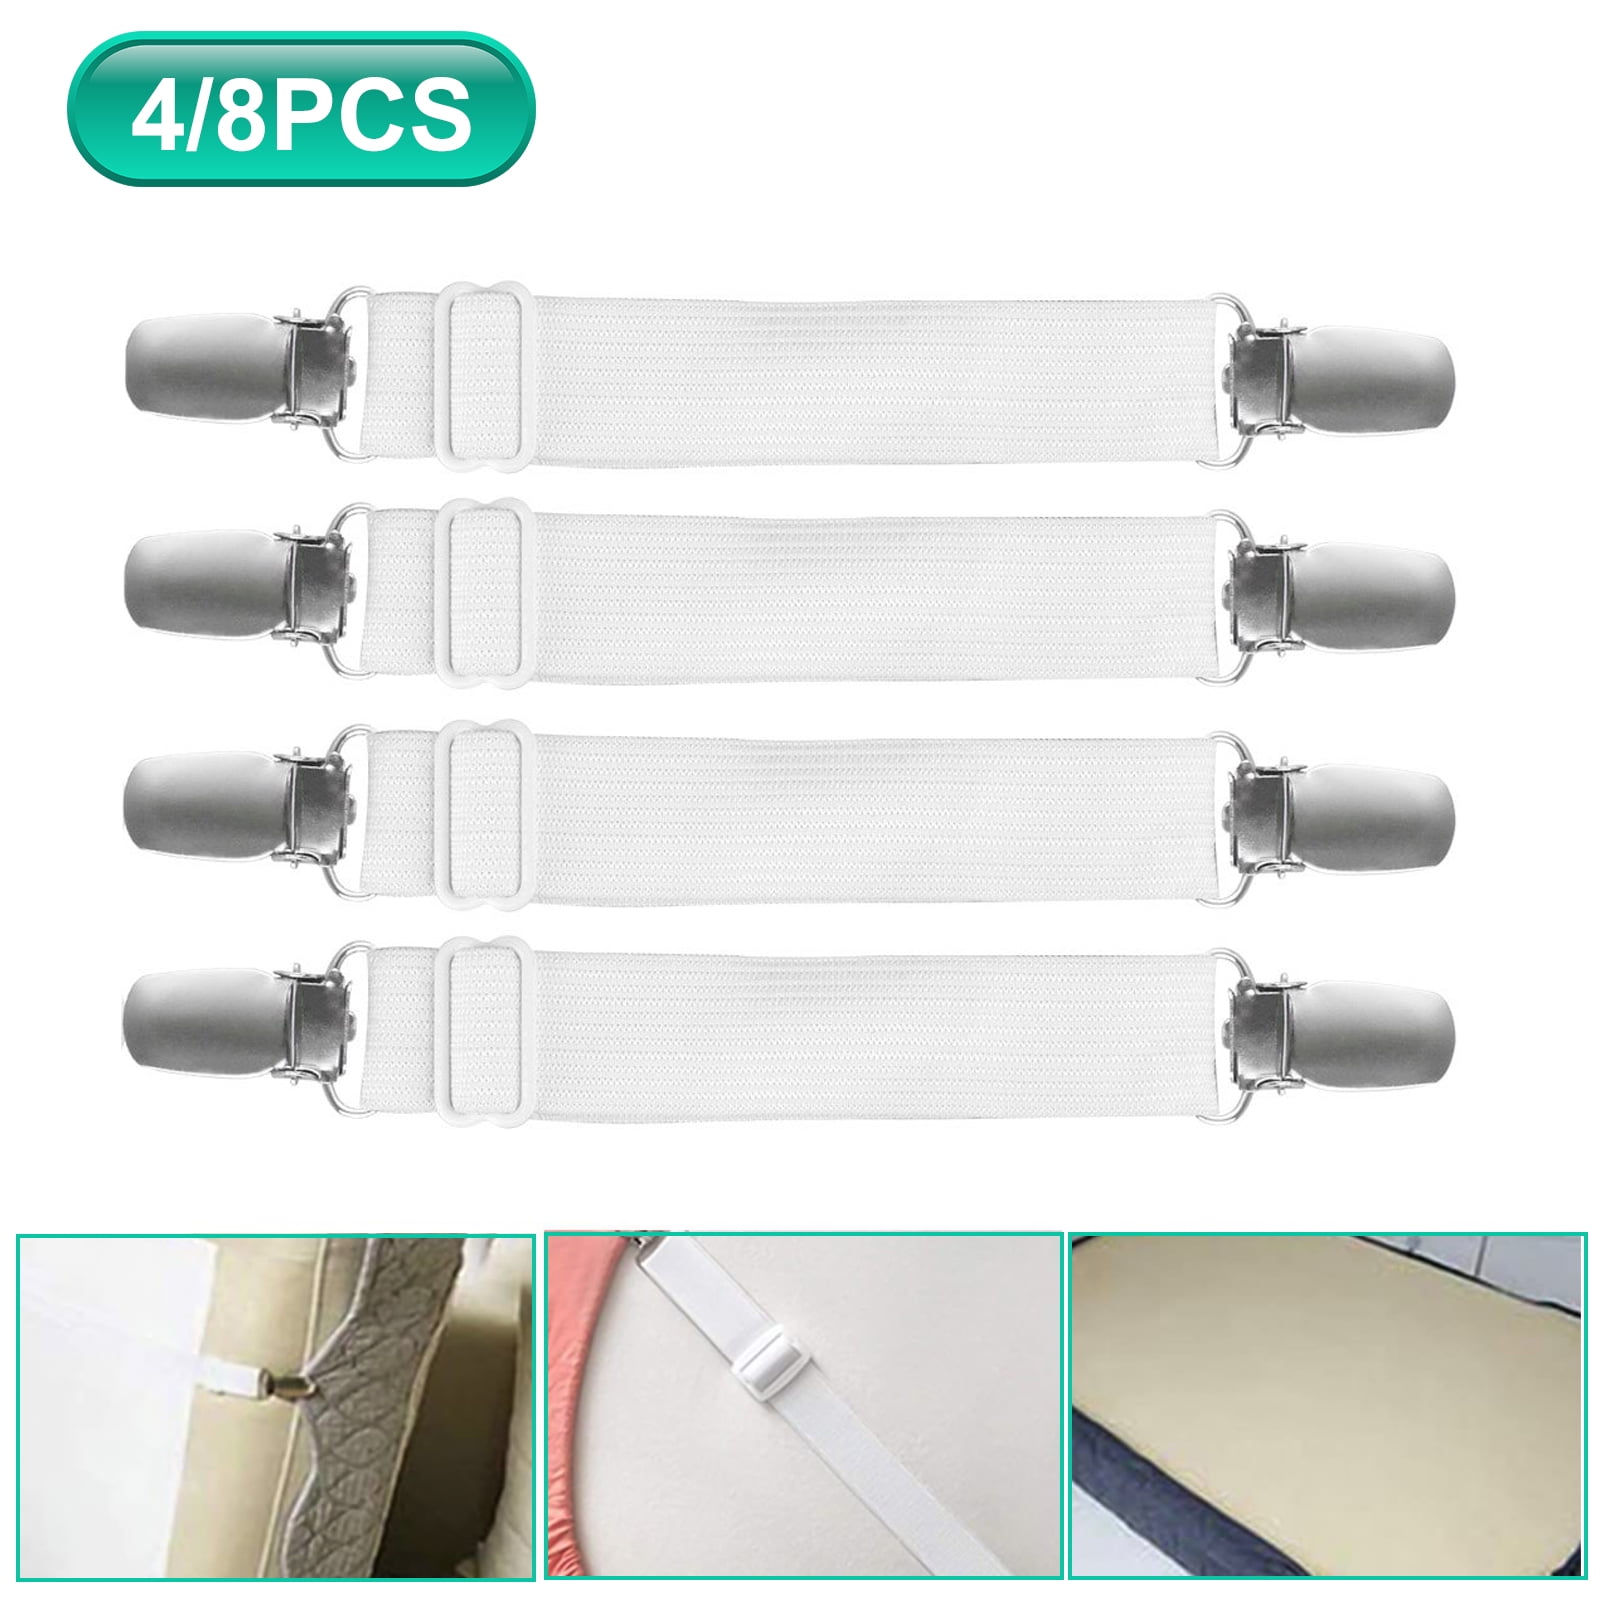 16 PCS Adjustable Bed Sheet Straps Ironing Board Cover Fitted Sheets Bed Sheet Holders Straps Fasteners Adjustable Elastic Sheet Grippers Fasteners for Flat Sheets 